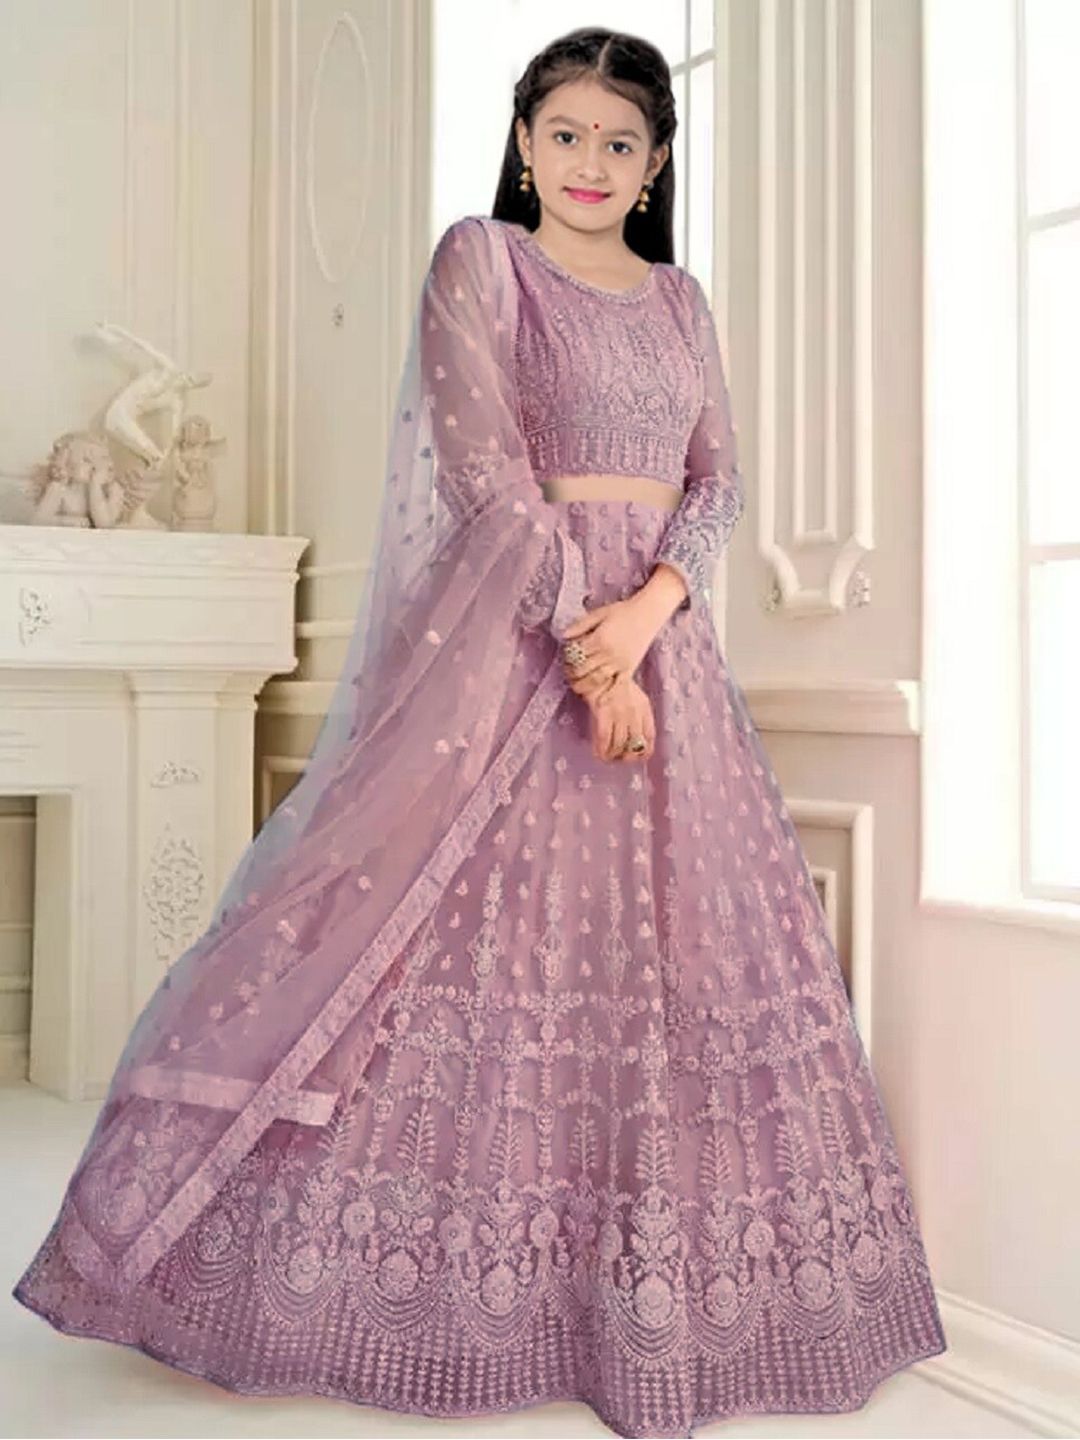 BAESD Girls Embroidered Semi-Stitched Lehenga & Unstitched Blouse With Dupatta Price in India